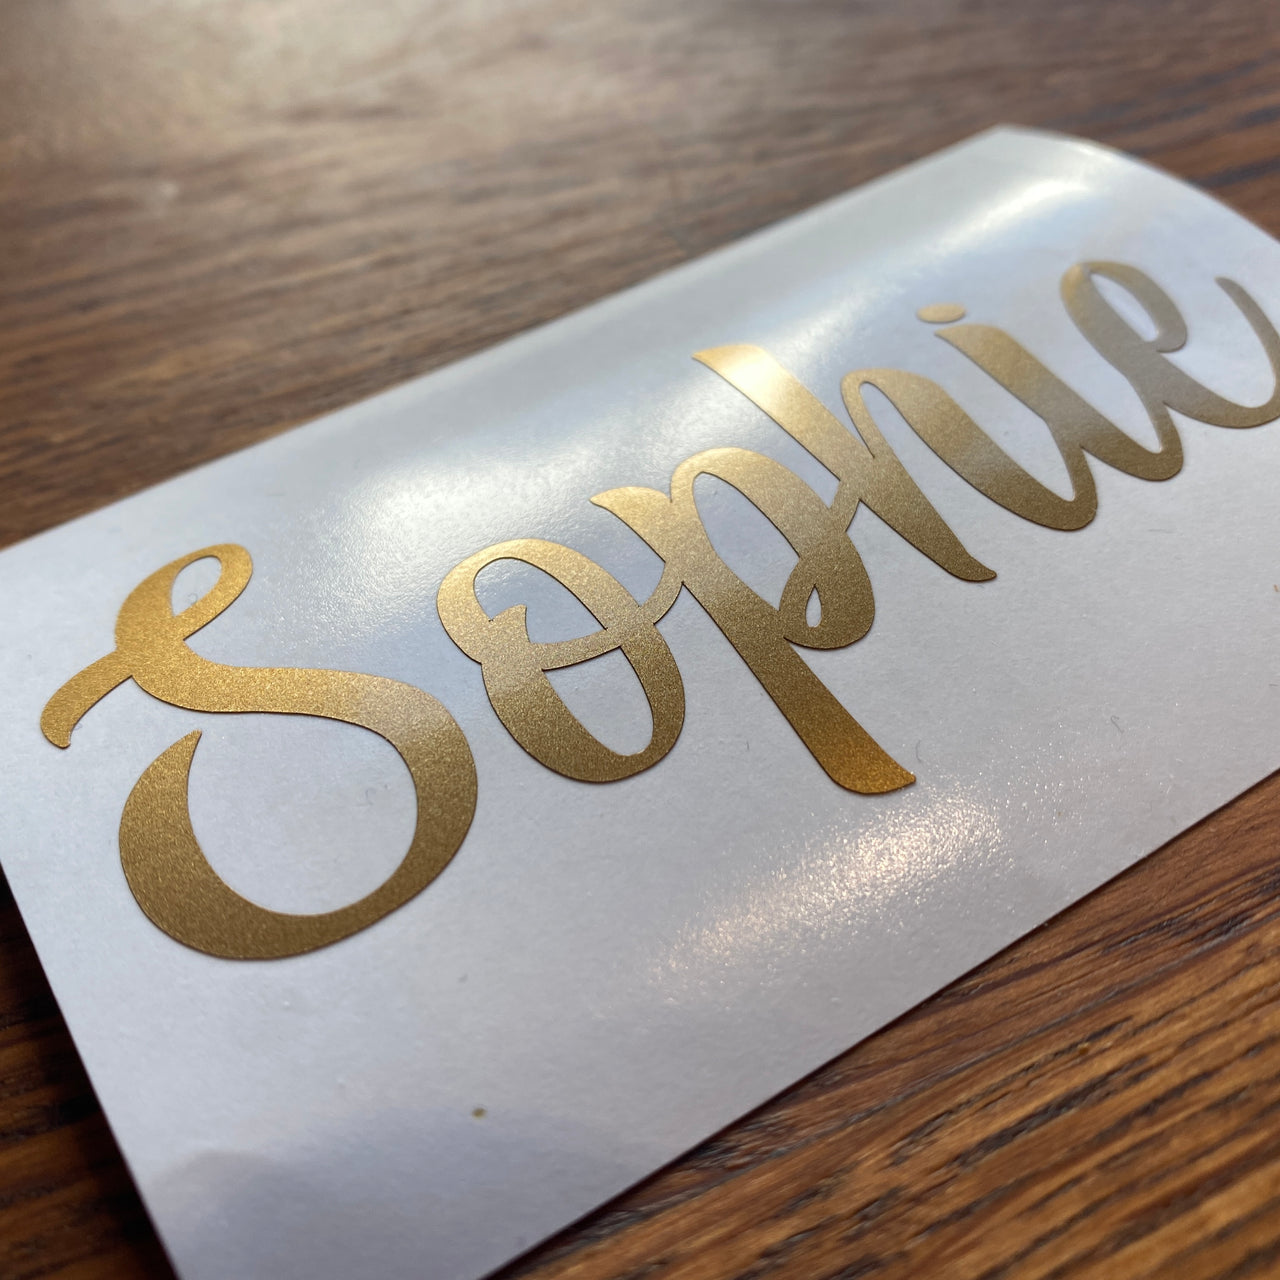 A metallic gold decal with the name Sophie cut out